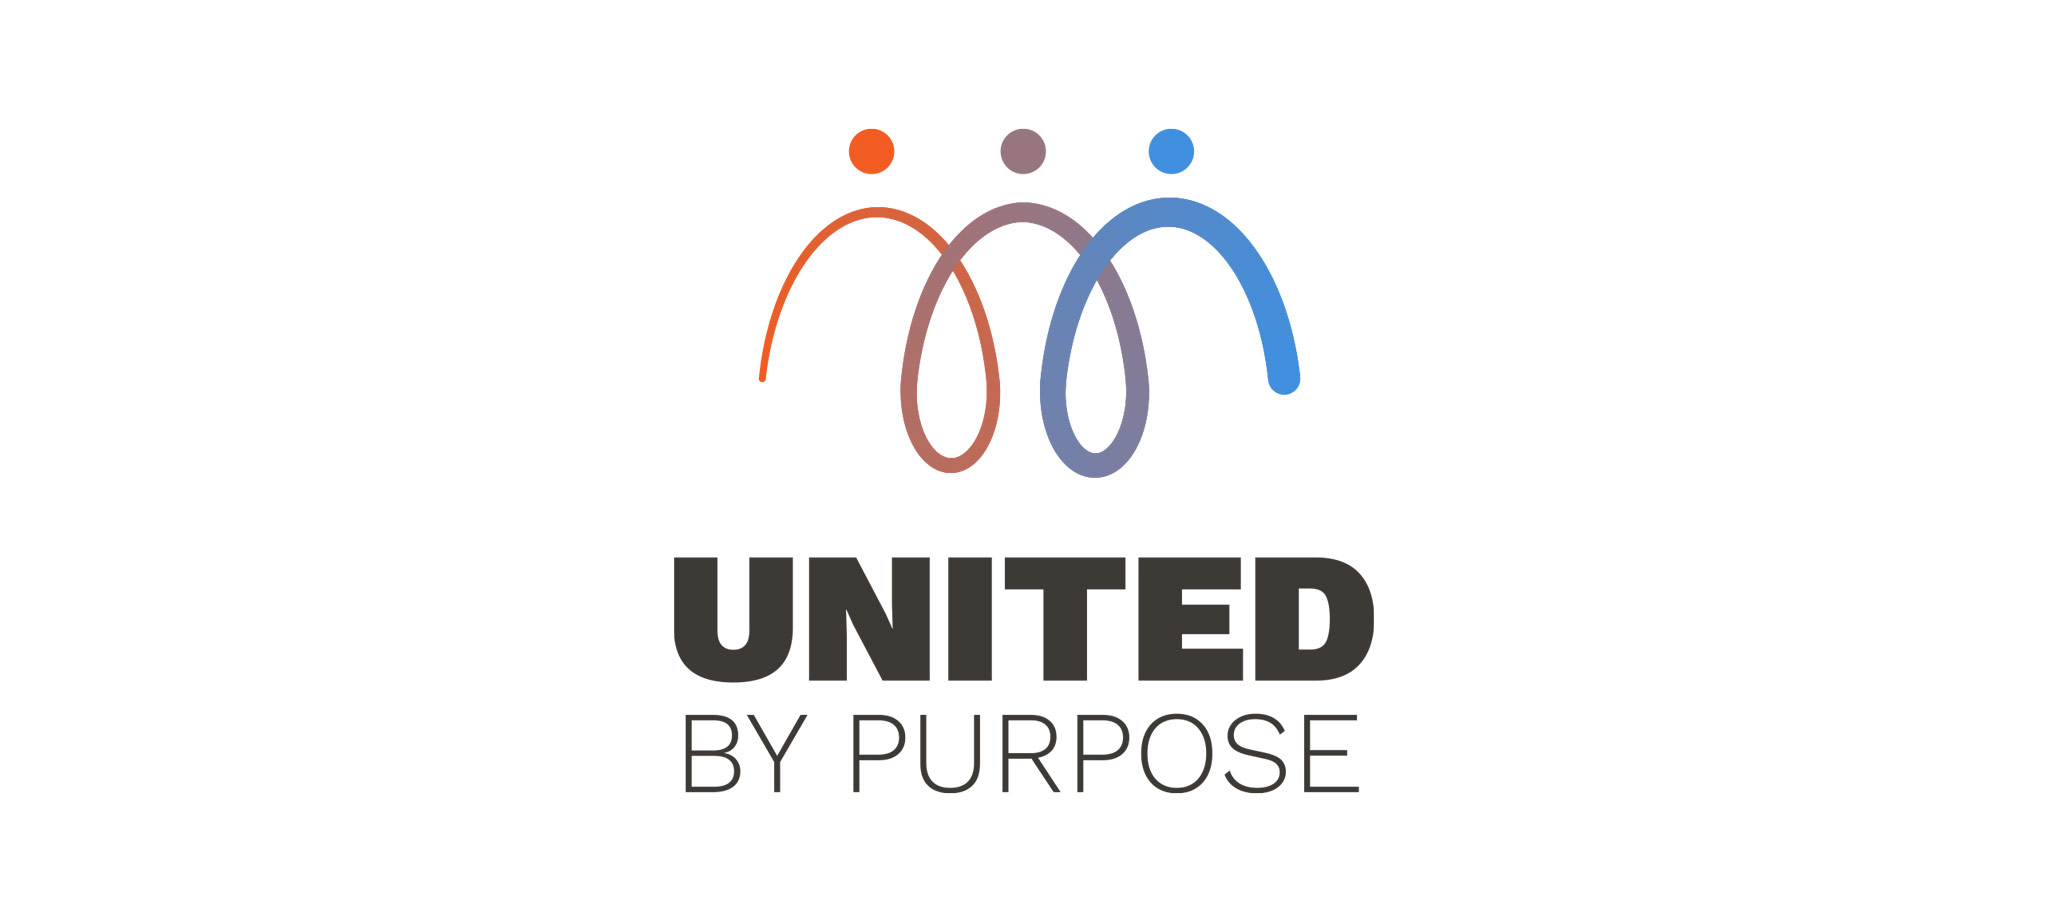 The logo reads "United by purpose" and includes abstract line art representing people linked arm-in-arm.